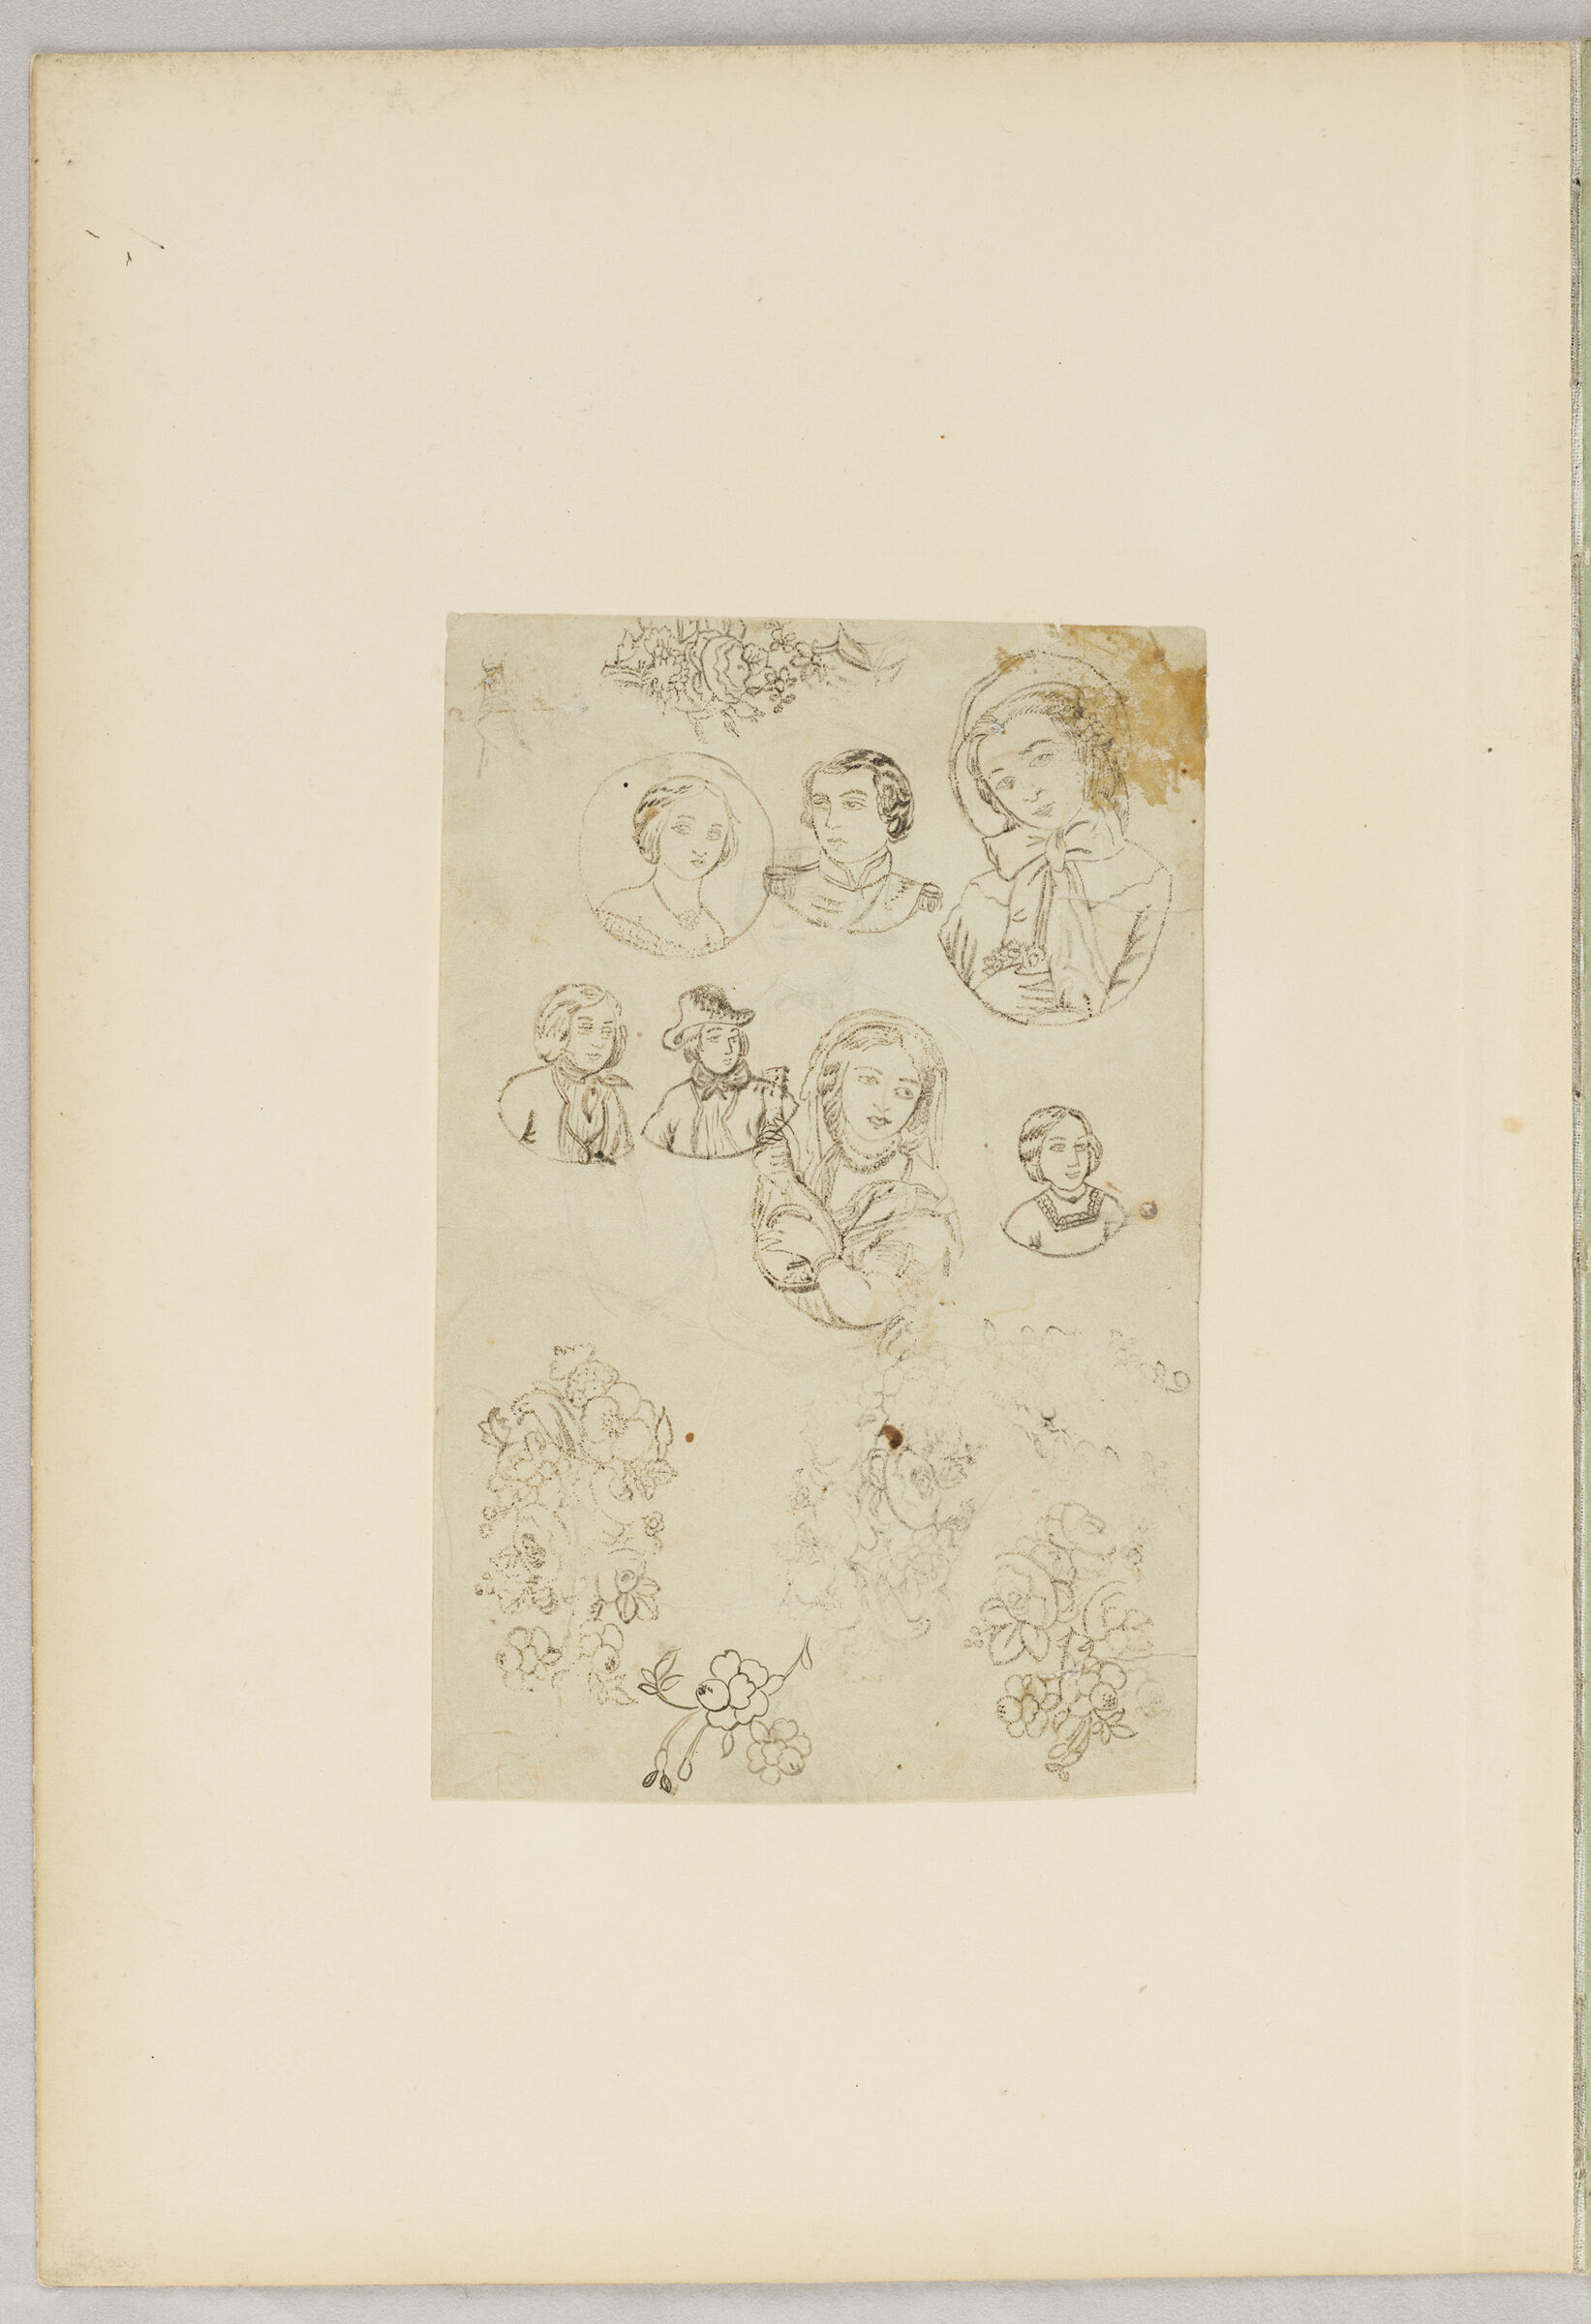 Folio 22 From An Album Of Drawings And Paintings: Sheet Of Portrait Sketches And Flowers (Recto); Two Sheets: Dog And Decorative Frames; Kneeling Couple And Mixed Bouquet (Verso)